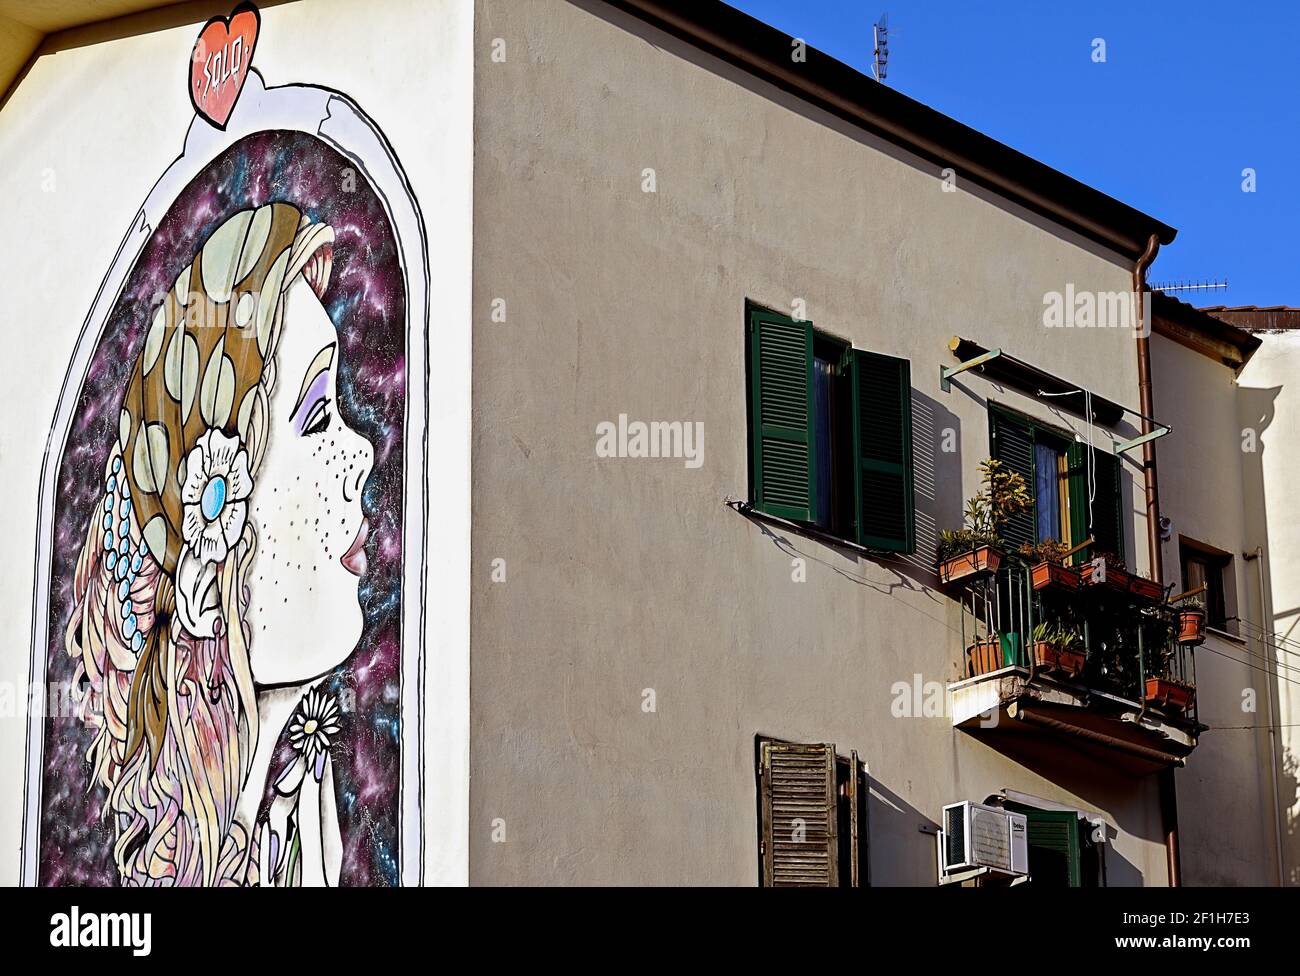 Glimpse of a street graffiti mural depicting a female face painted on a wall of a house in the Trullo neighborhood. Rome, Italy, Europe, EU Stock Photo